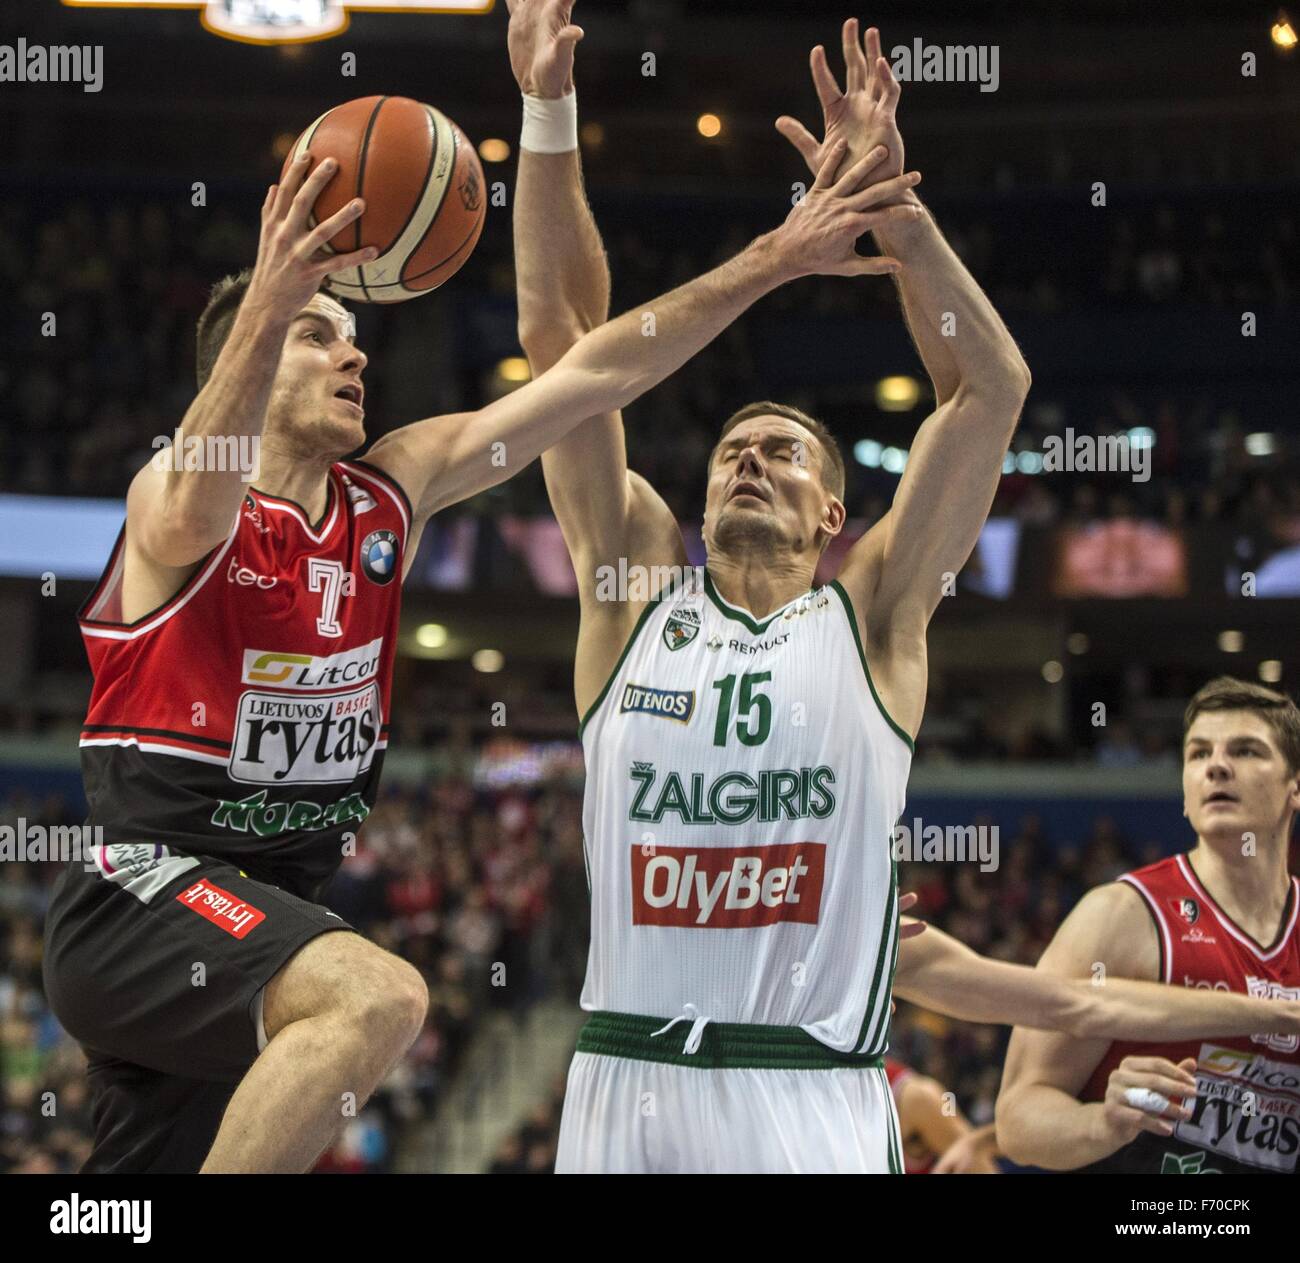 Vilnius, Lithuania. 22nd Nov, 2015. Adas Juskevicius (L) of Lietuvos rytas  goes to the basket in a match against Zalgiris during the Lithuanian  Basketball League match in Vilnius, Lithuania, Nov. 22, 2015.